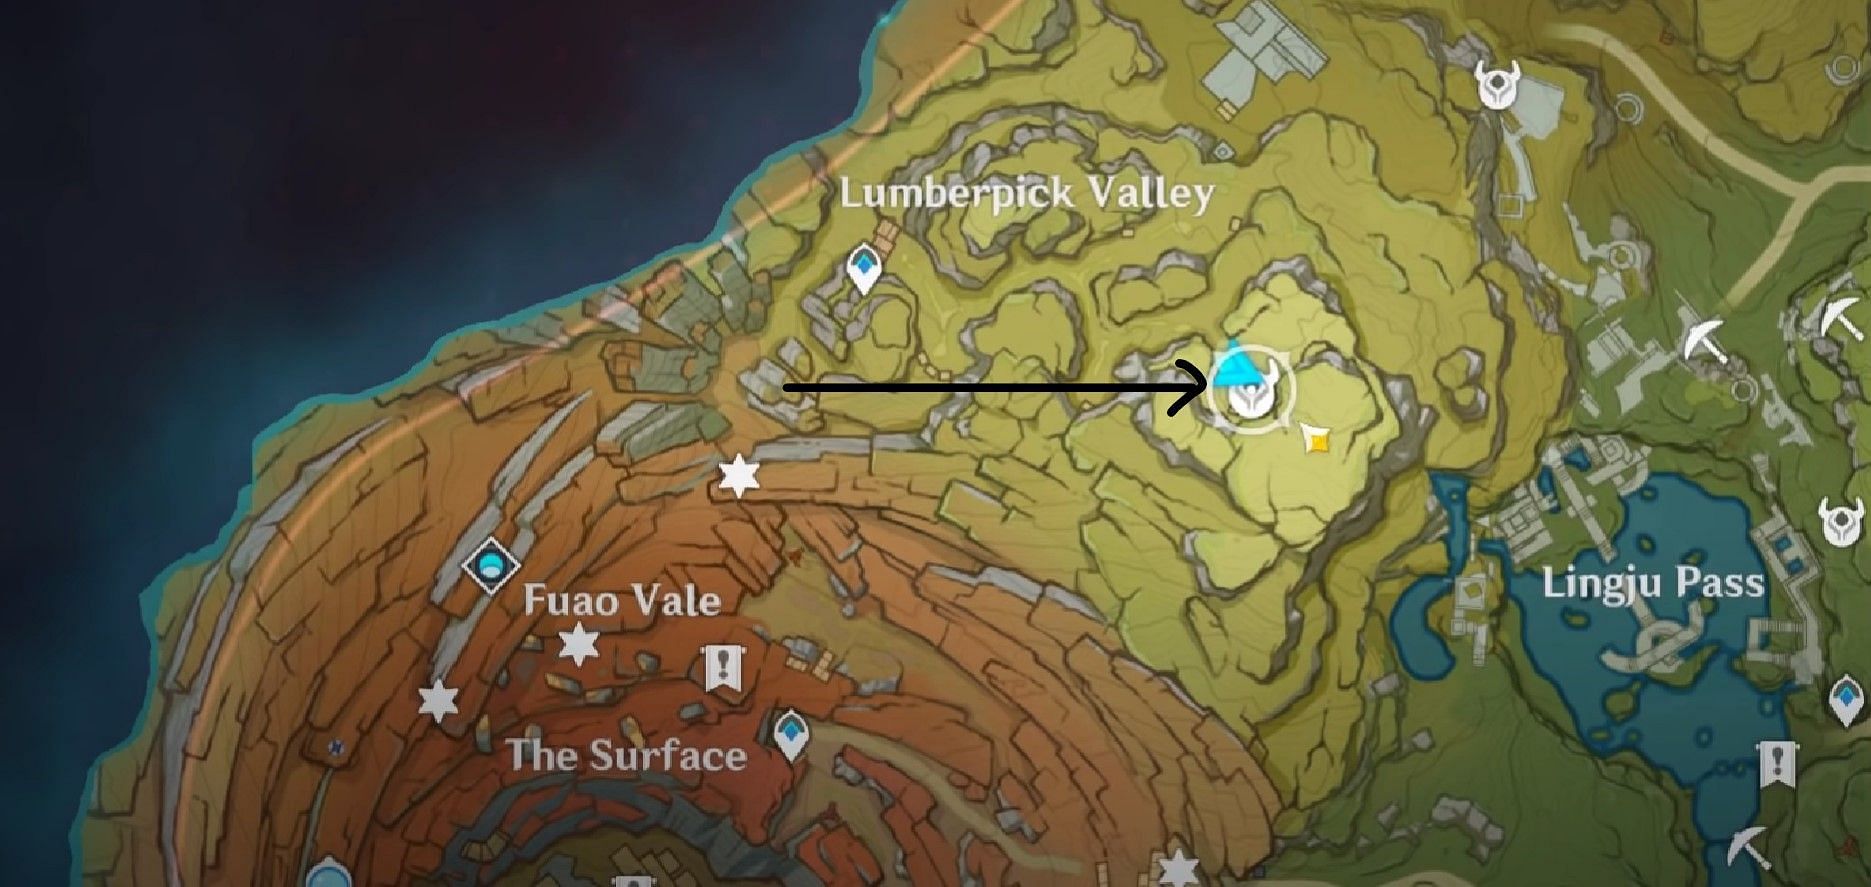 Location of the second map fragment near Lumberpick Valley (Image via Genshin Impact)